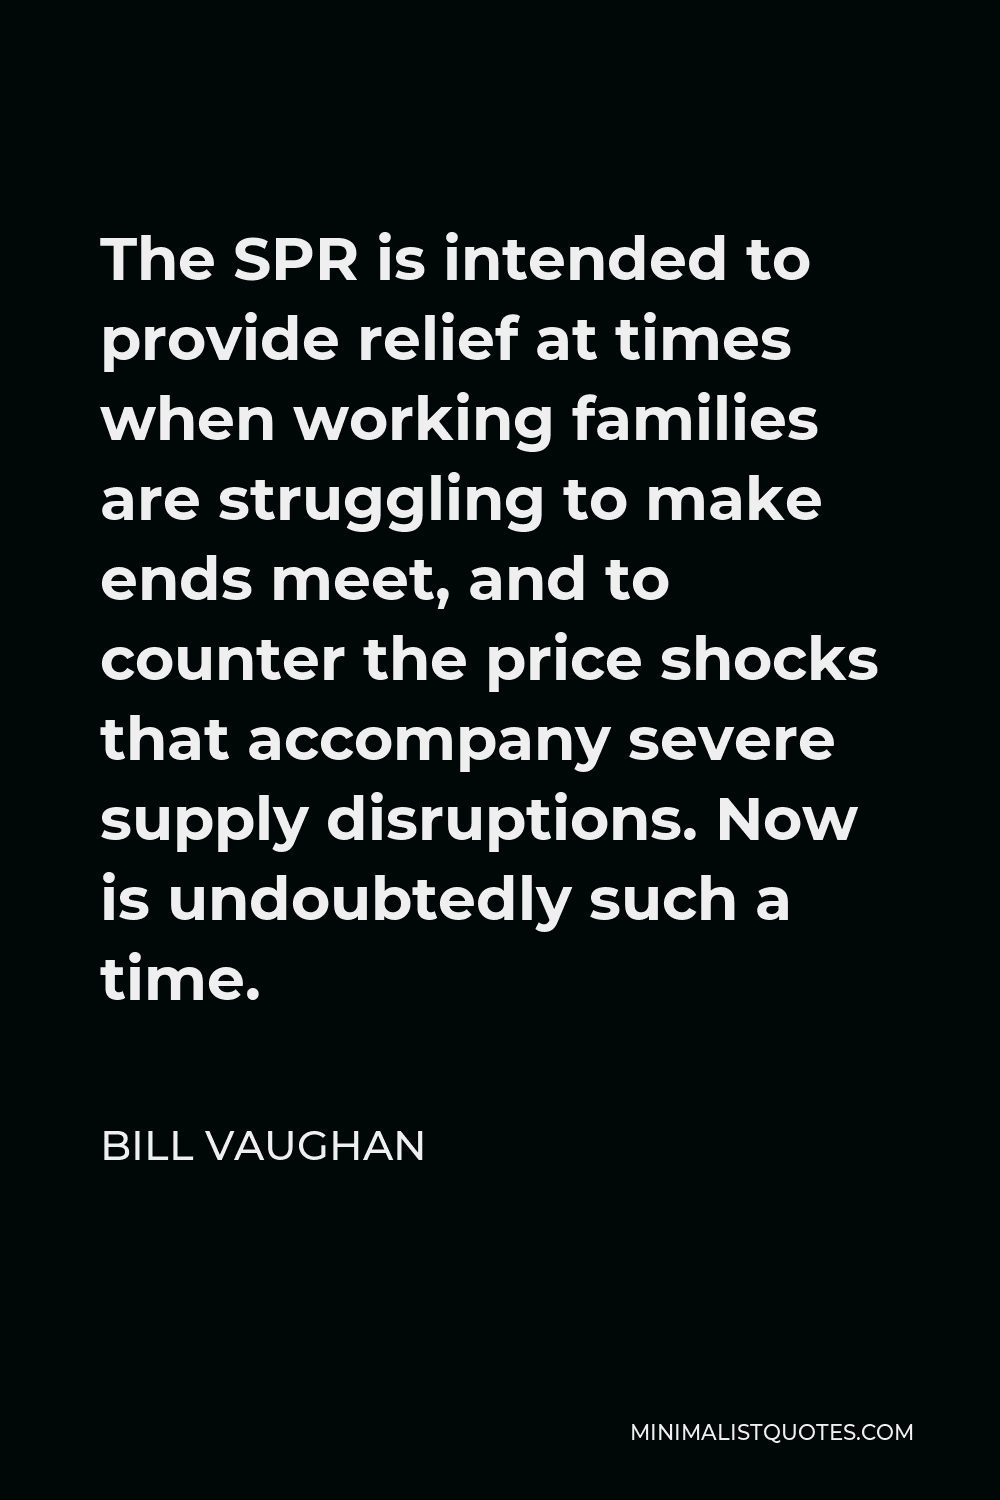 Bill Vaughan Quote - The SPR is intended to provide relief at times when working families are struggling to make ends meet, and to counter the price shocks that accompany severe supply disruptions. Now is undoubtedly such a time.